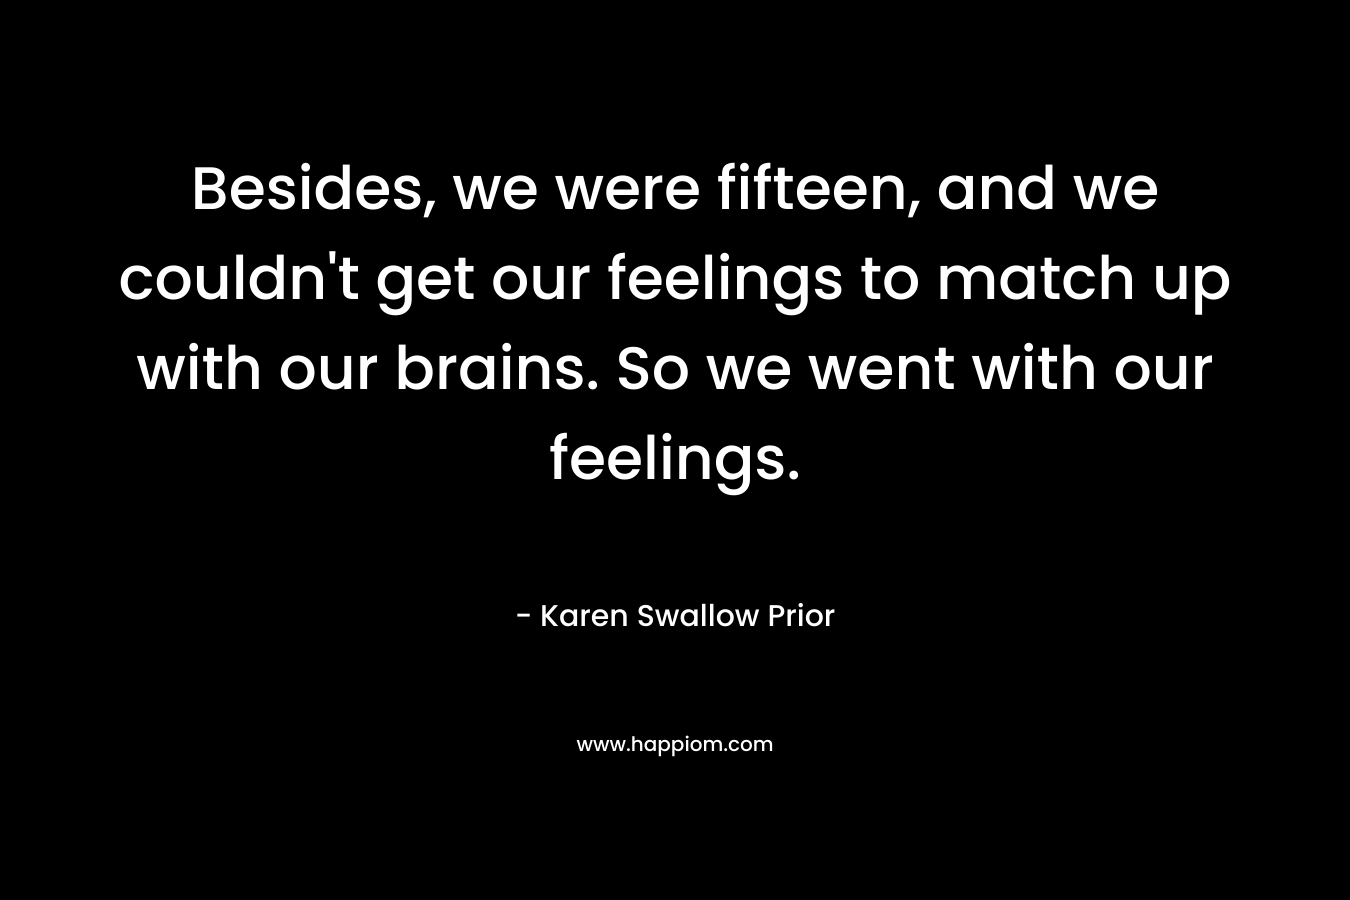 Besides, we were fifteen, and we couldn't get our feelings to match up with our brains. So we went with our feelings.